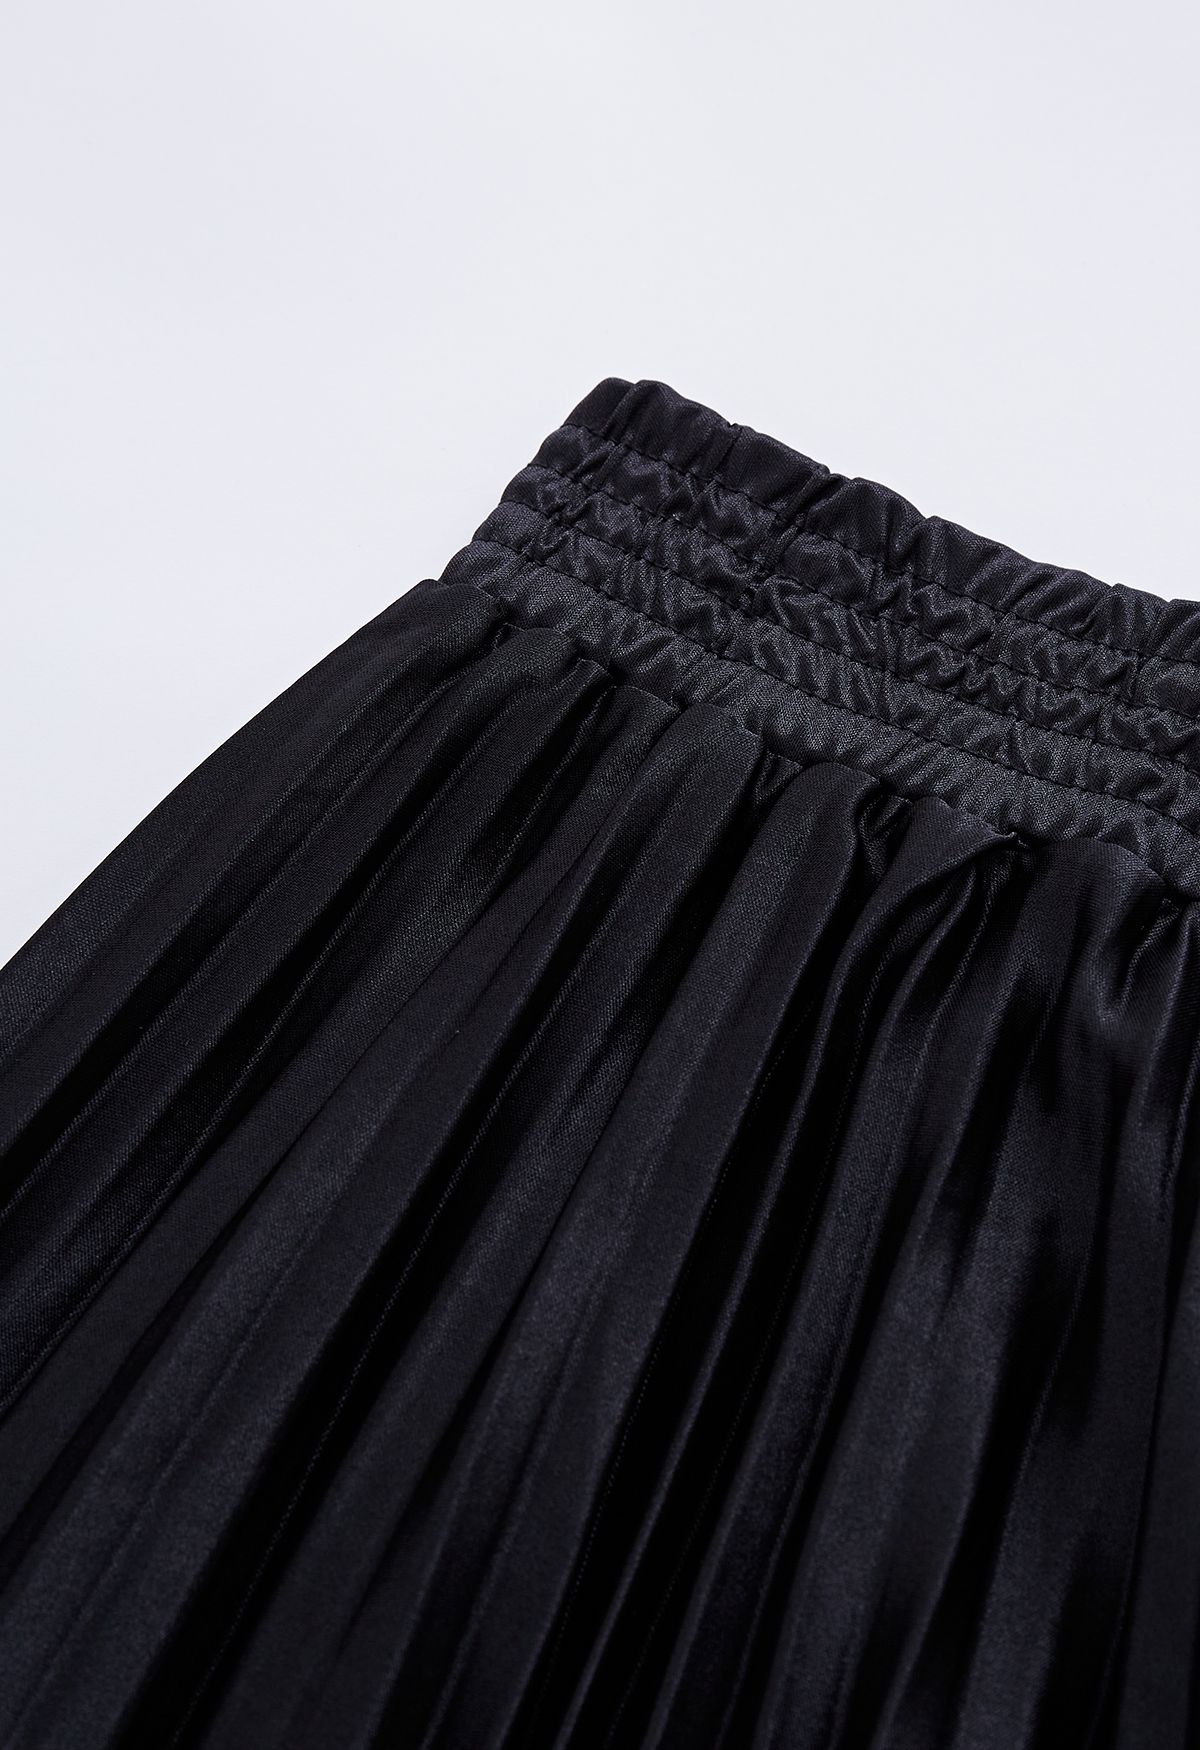 Glossy Pleated Maxi Skirt in Black